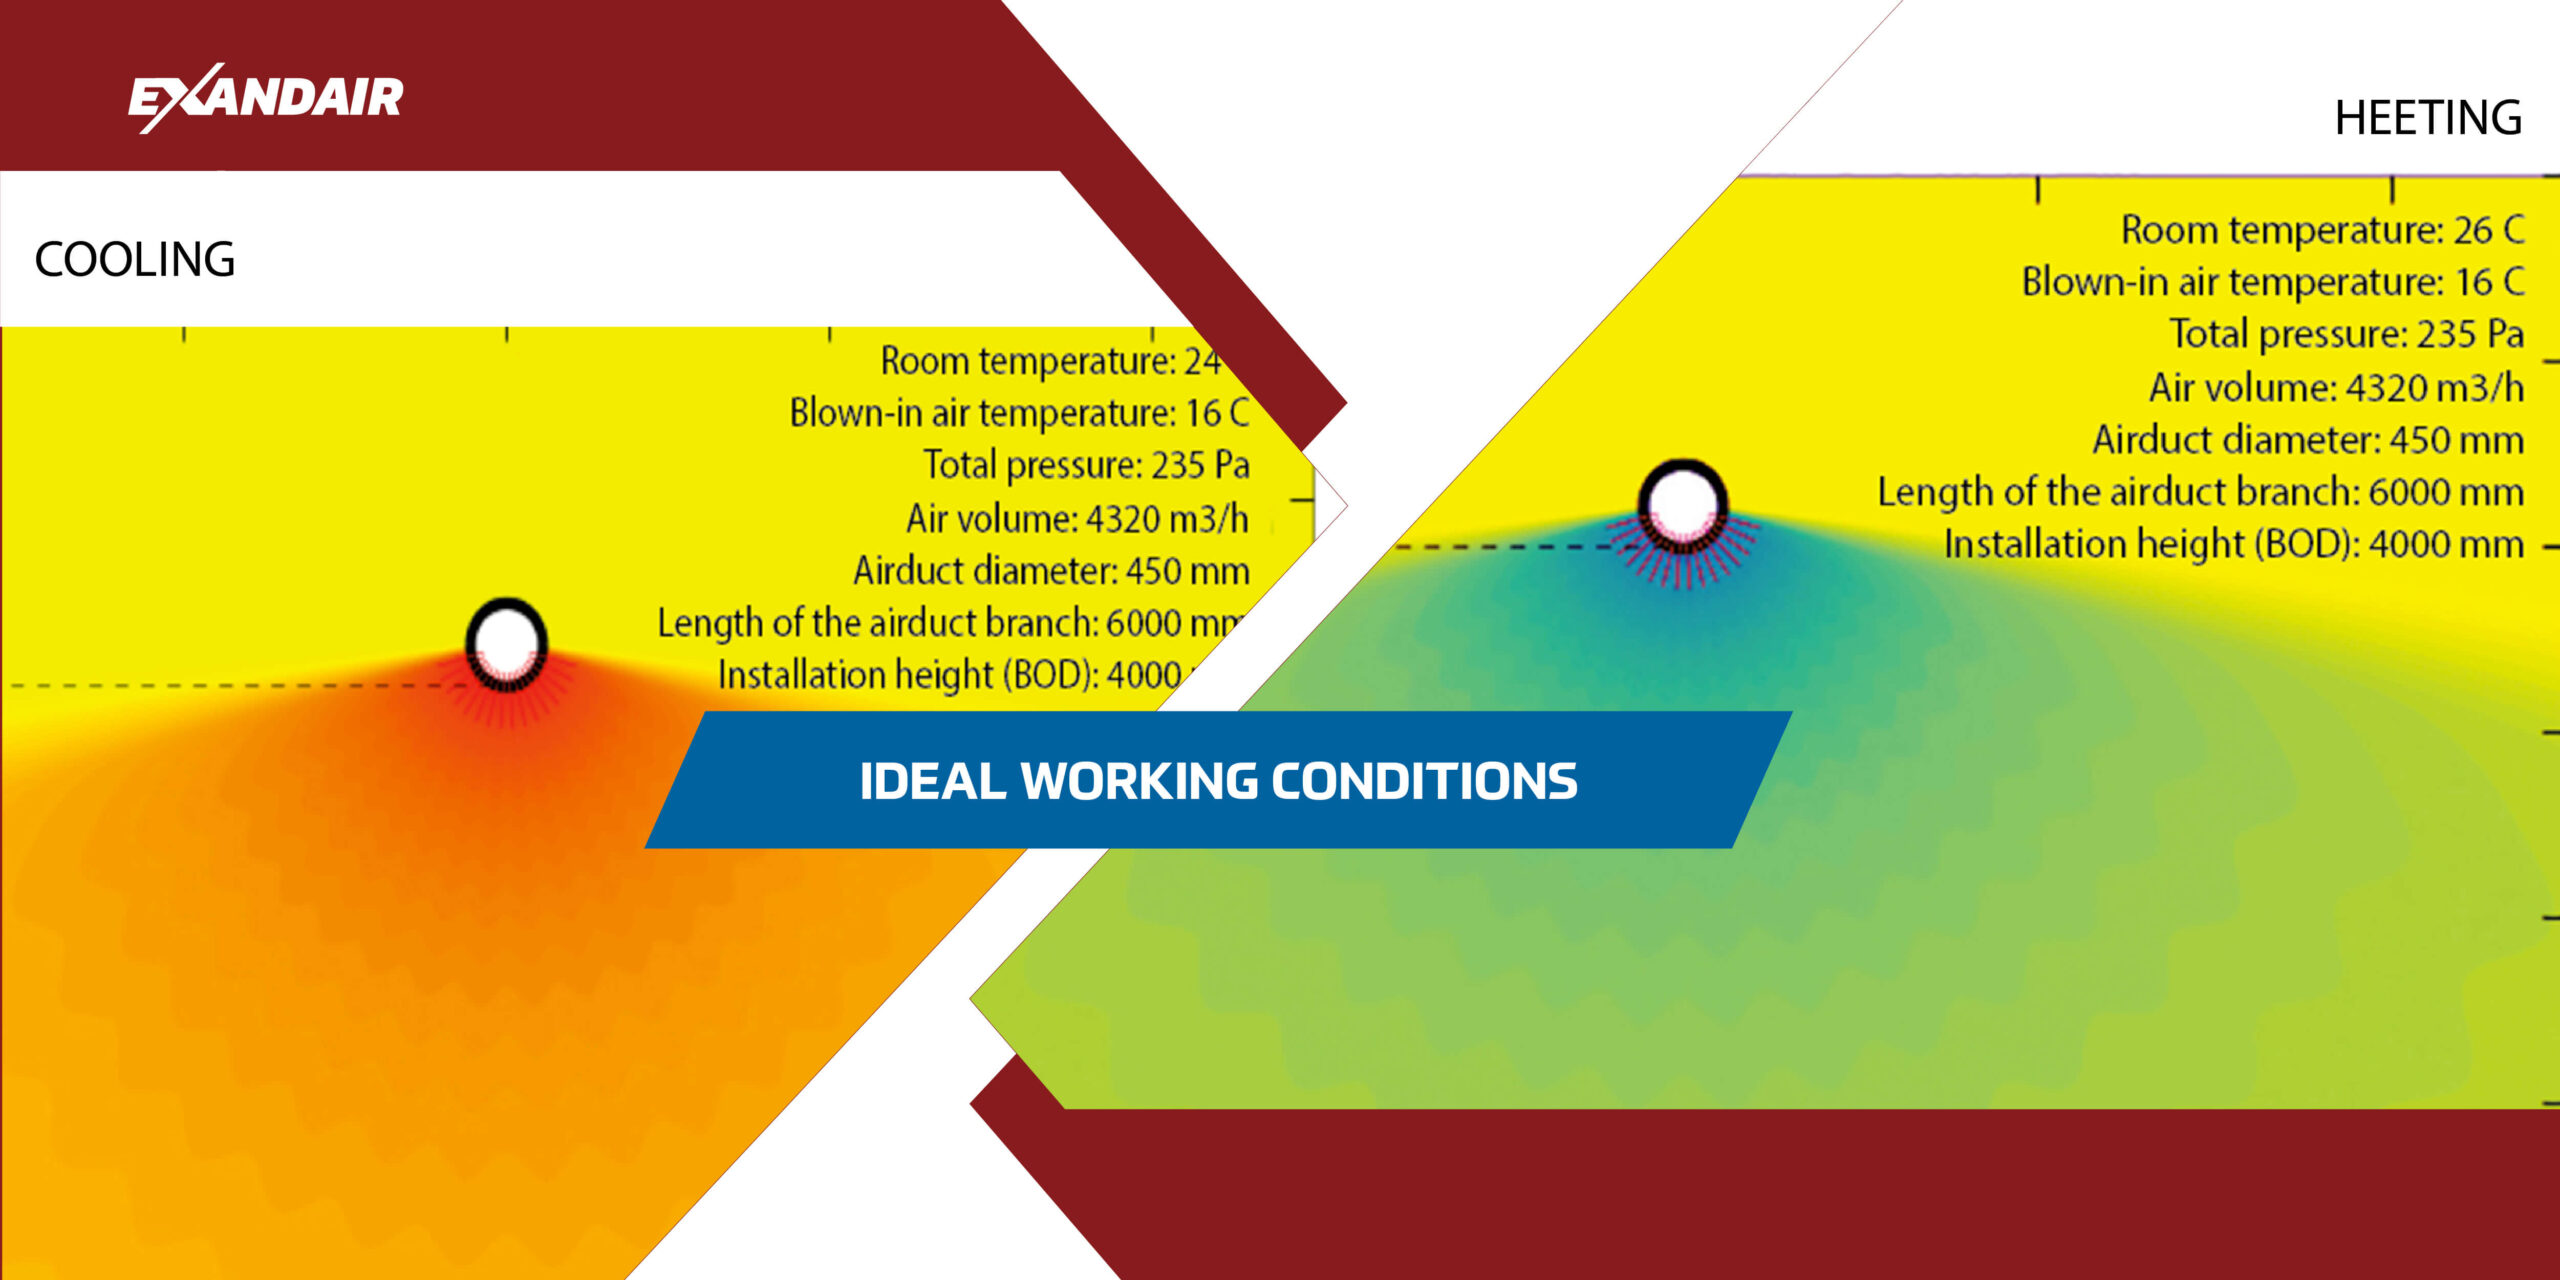 Ideal working conditions - Textile ducting is the future of air technology